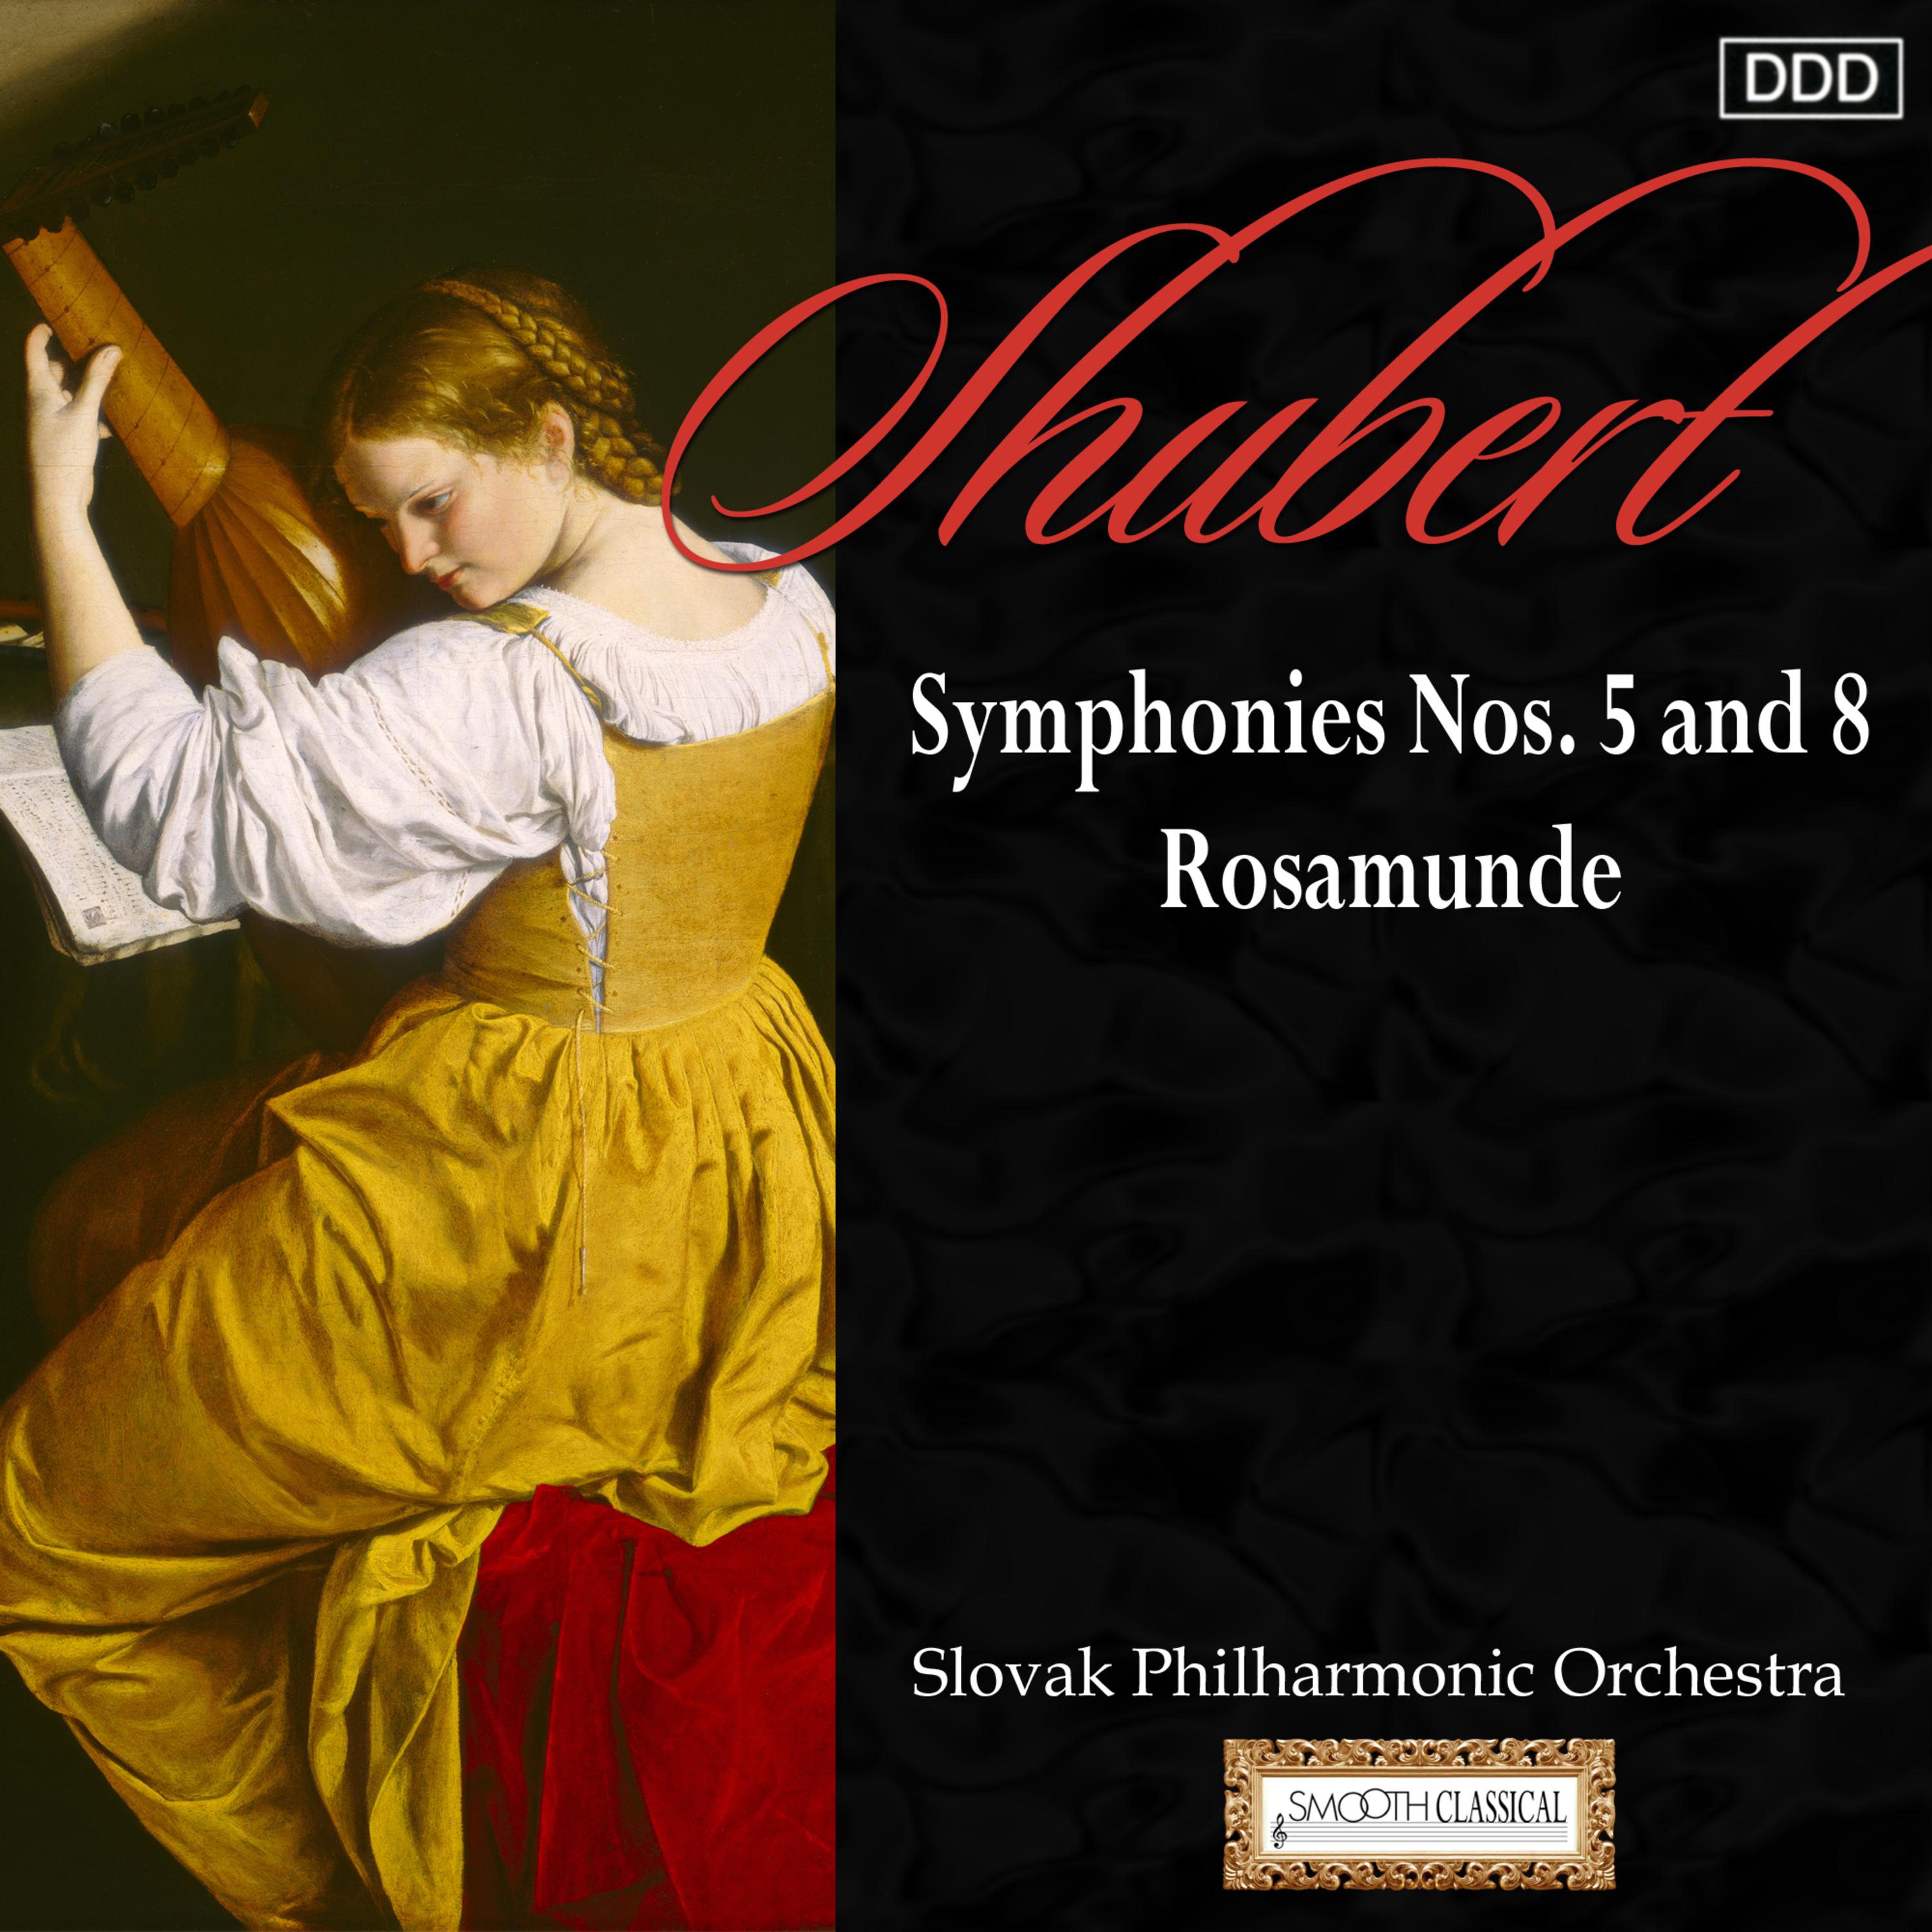 Symphony No. 7 in B Minor, D. 759 "Unfinished": I. Allegro moderato